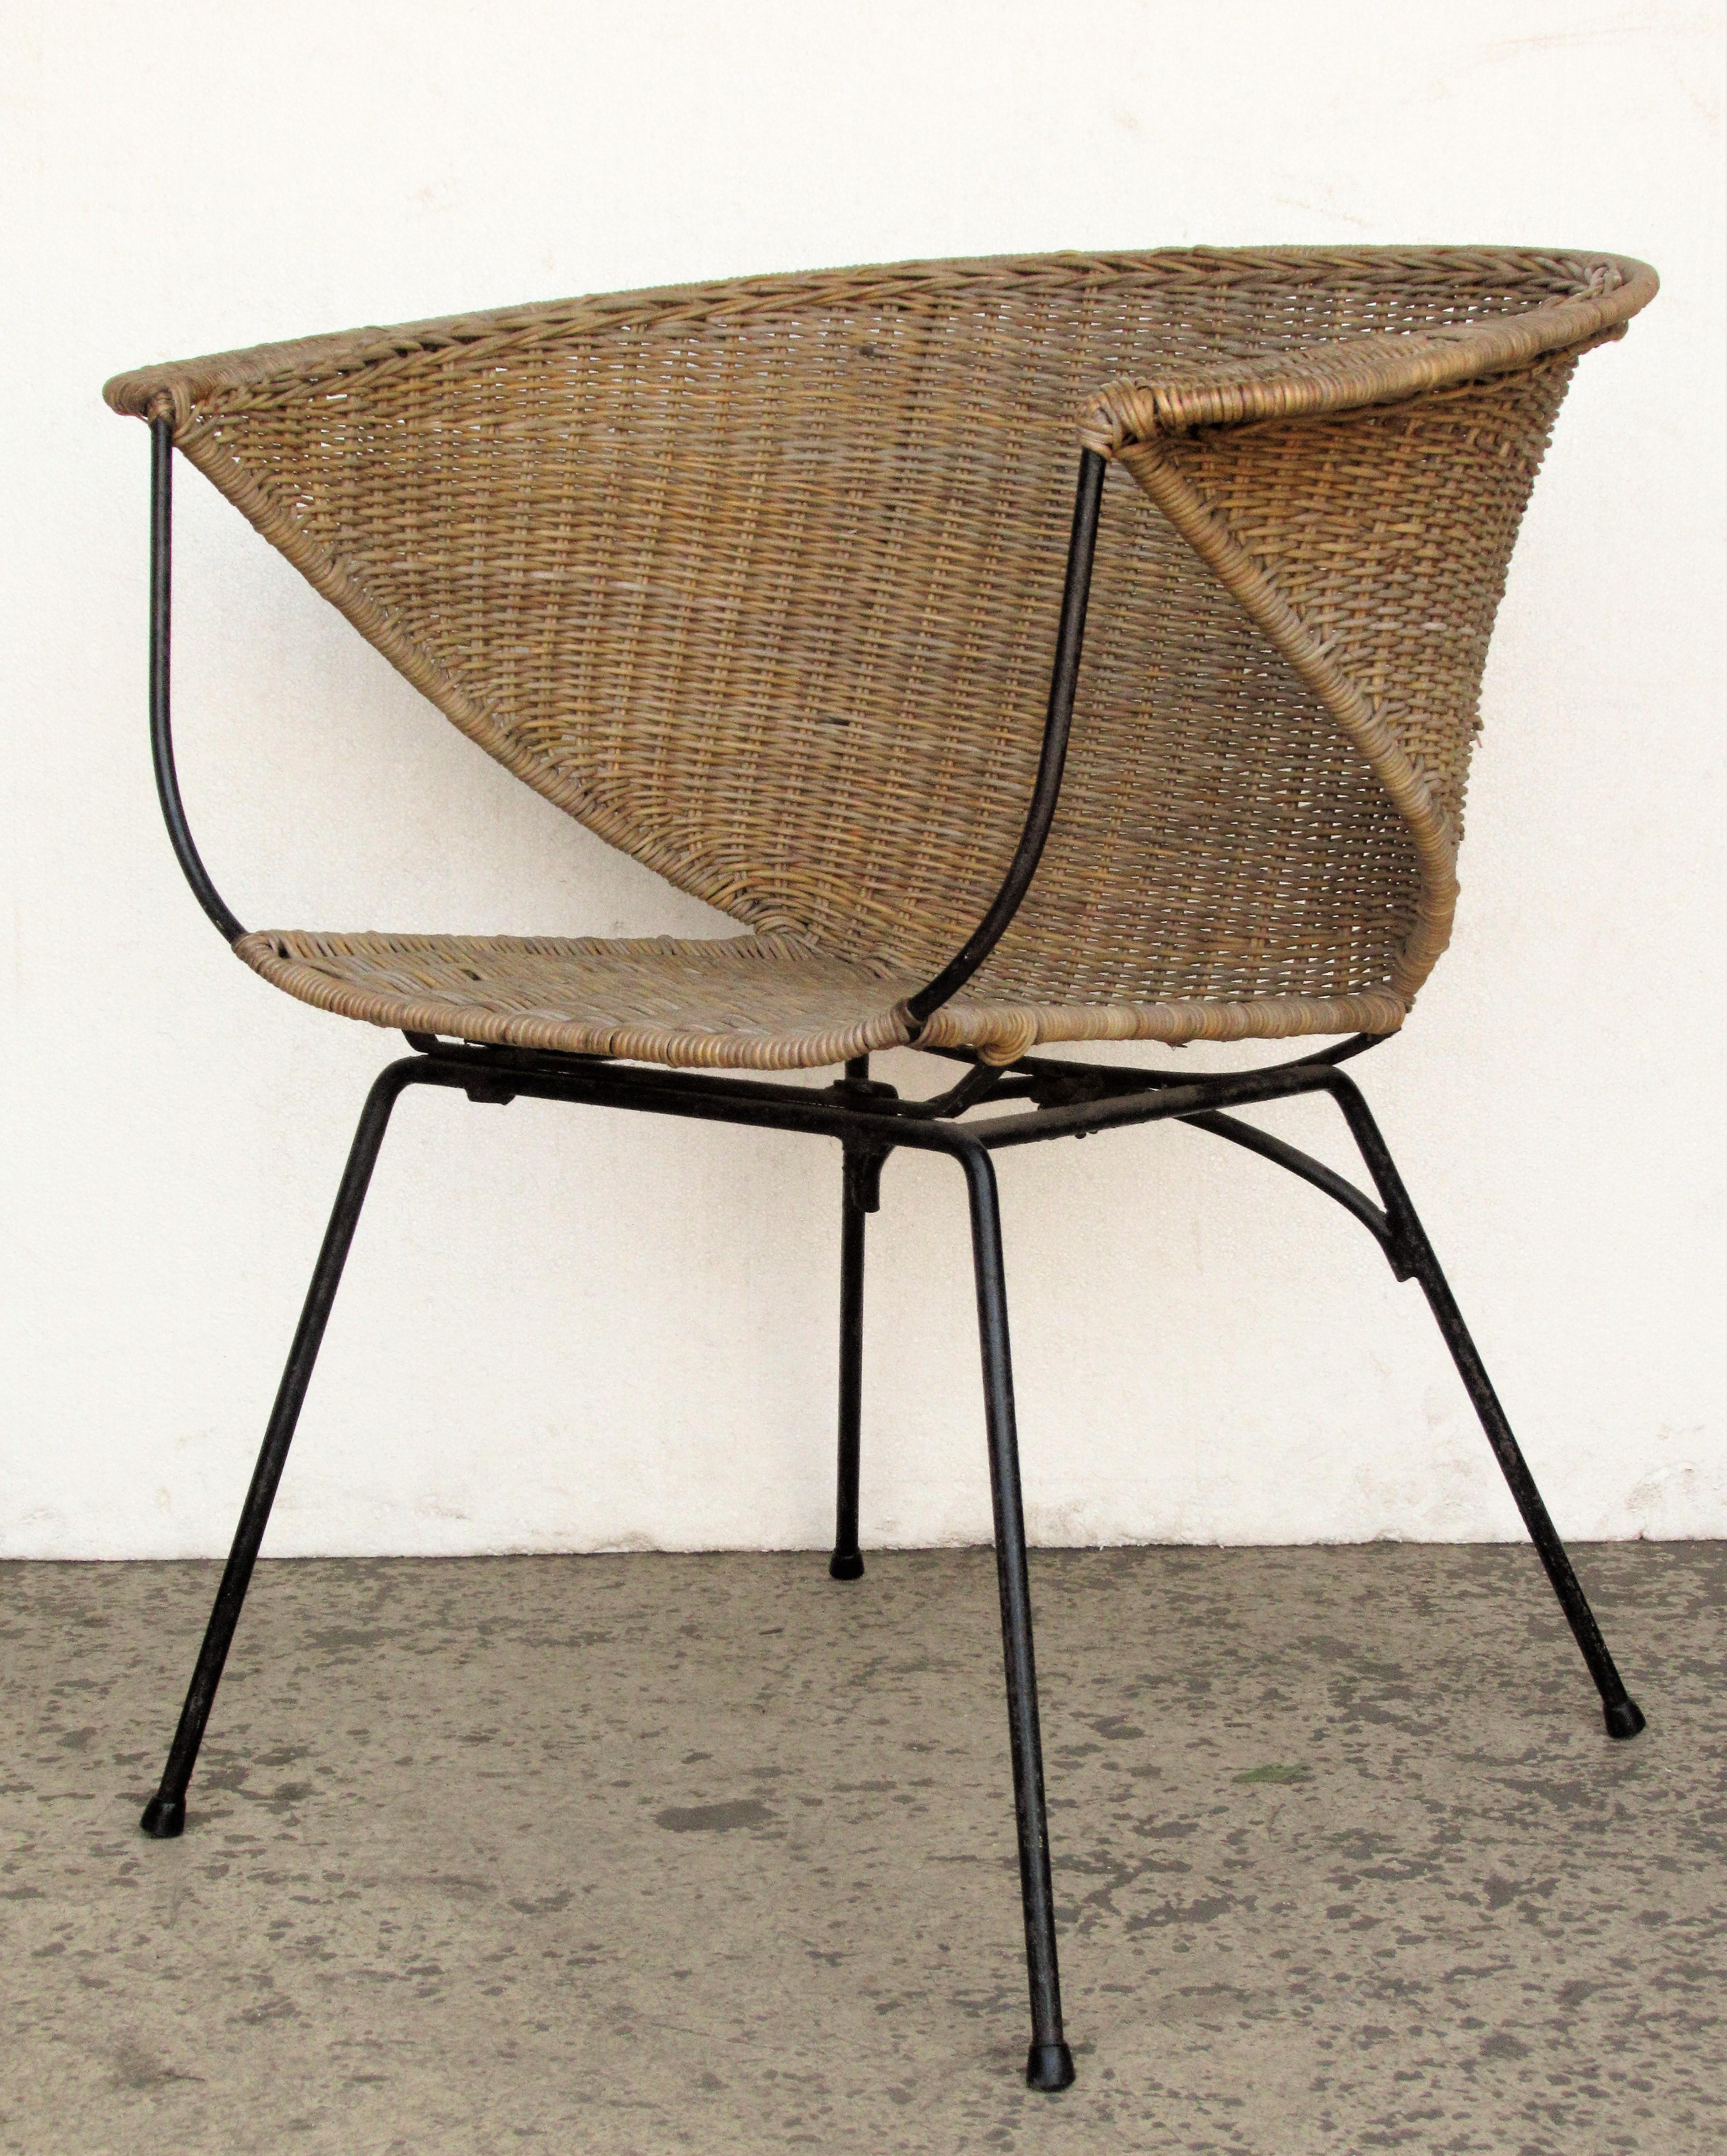  Mid 20th Century Modernist Iron and Rattan Chair 1